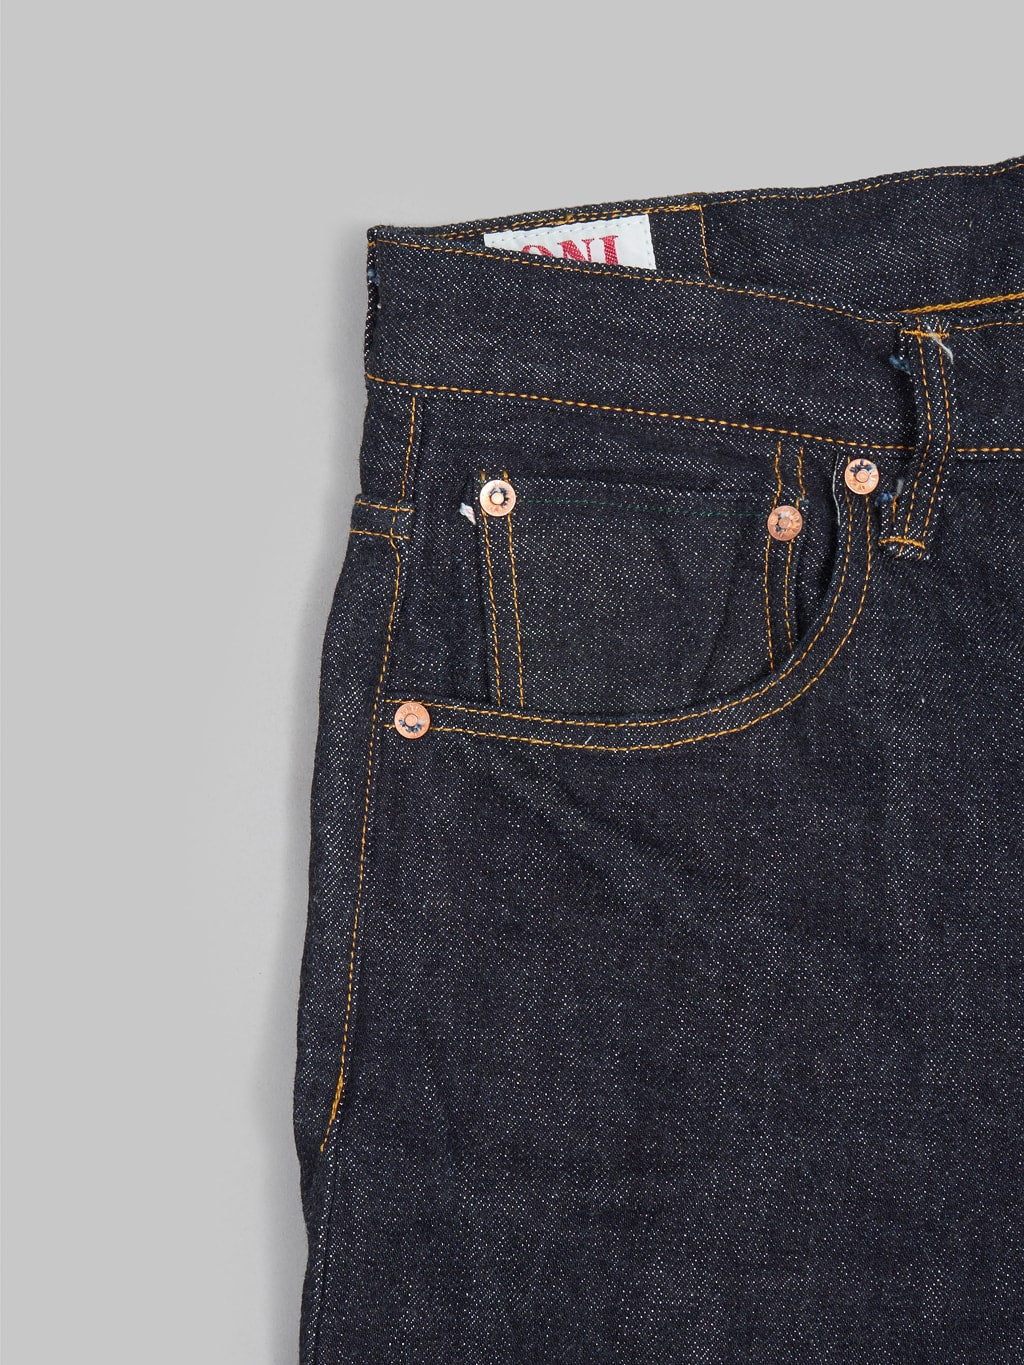 ONI Denim 222 Low Tension Super Wide Straight Jeans coin pocket